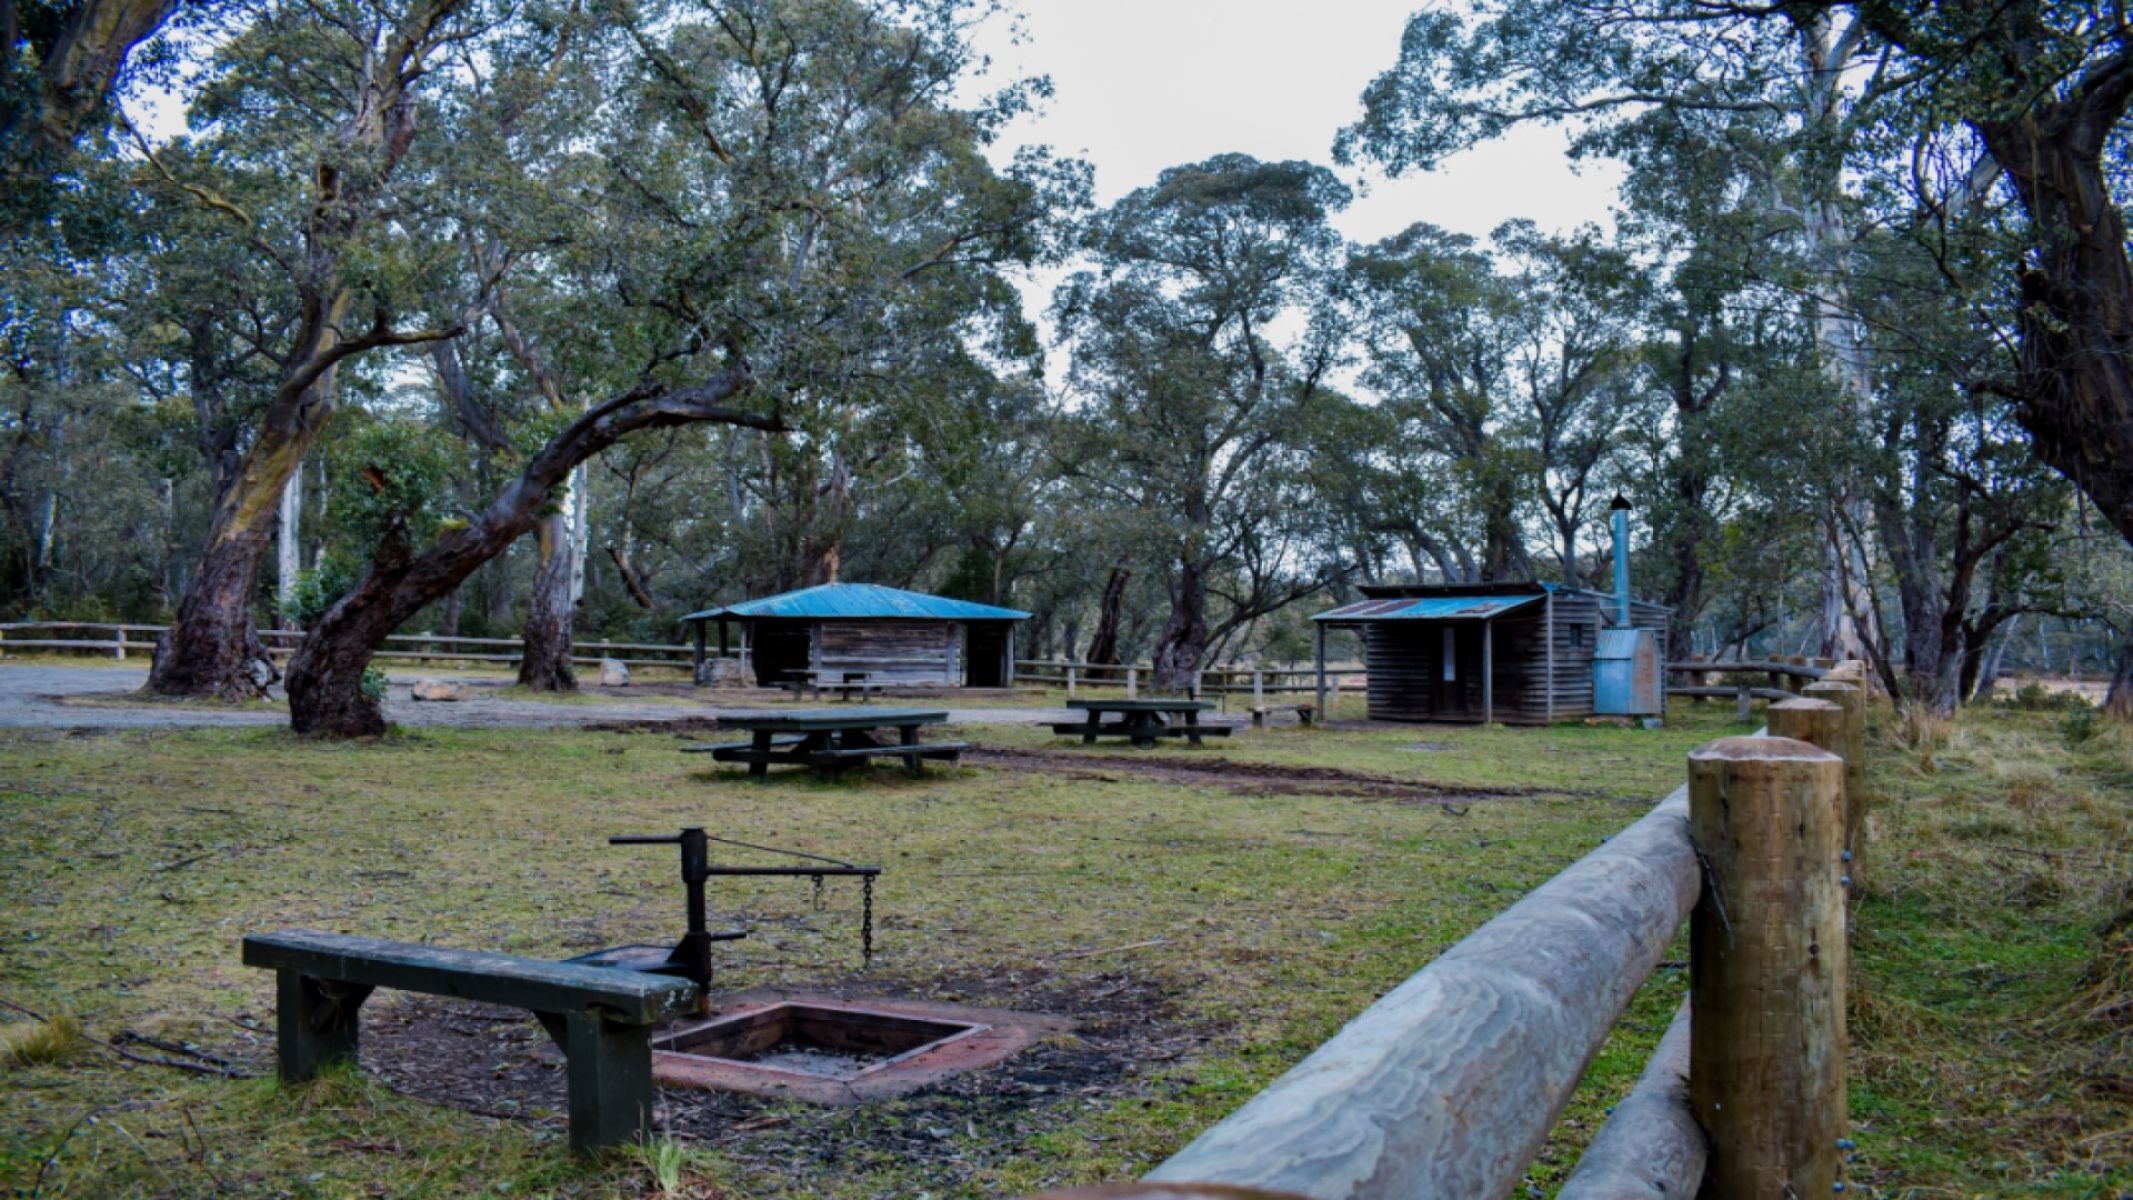 An historic forestry worker hut structure in a grassy area